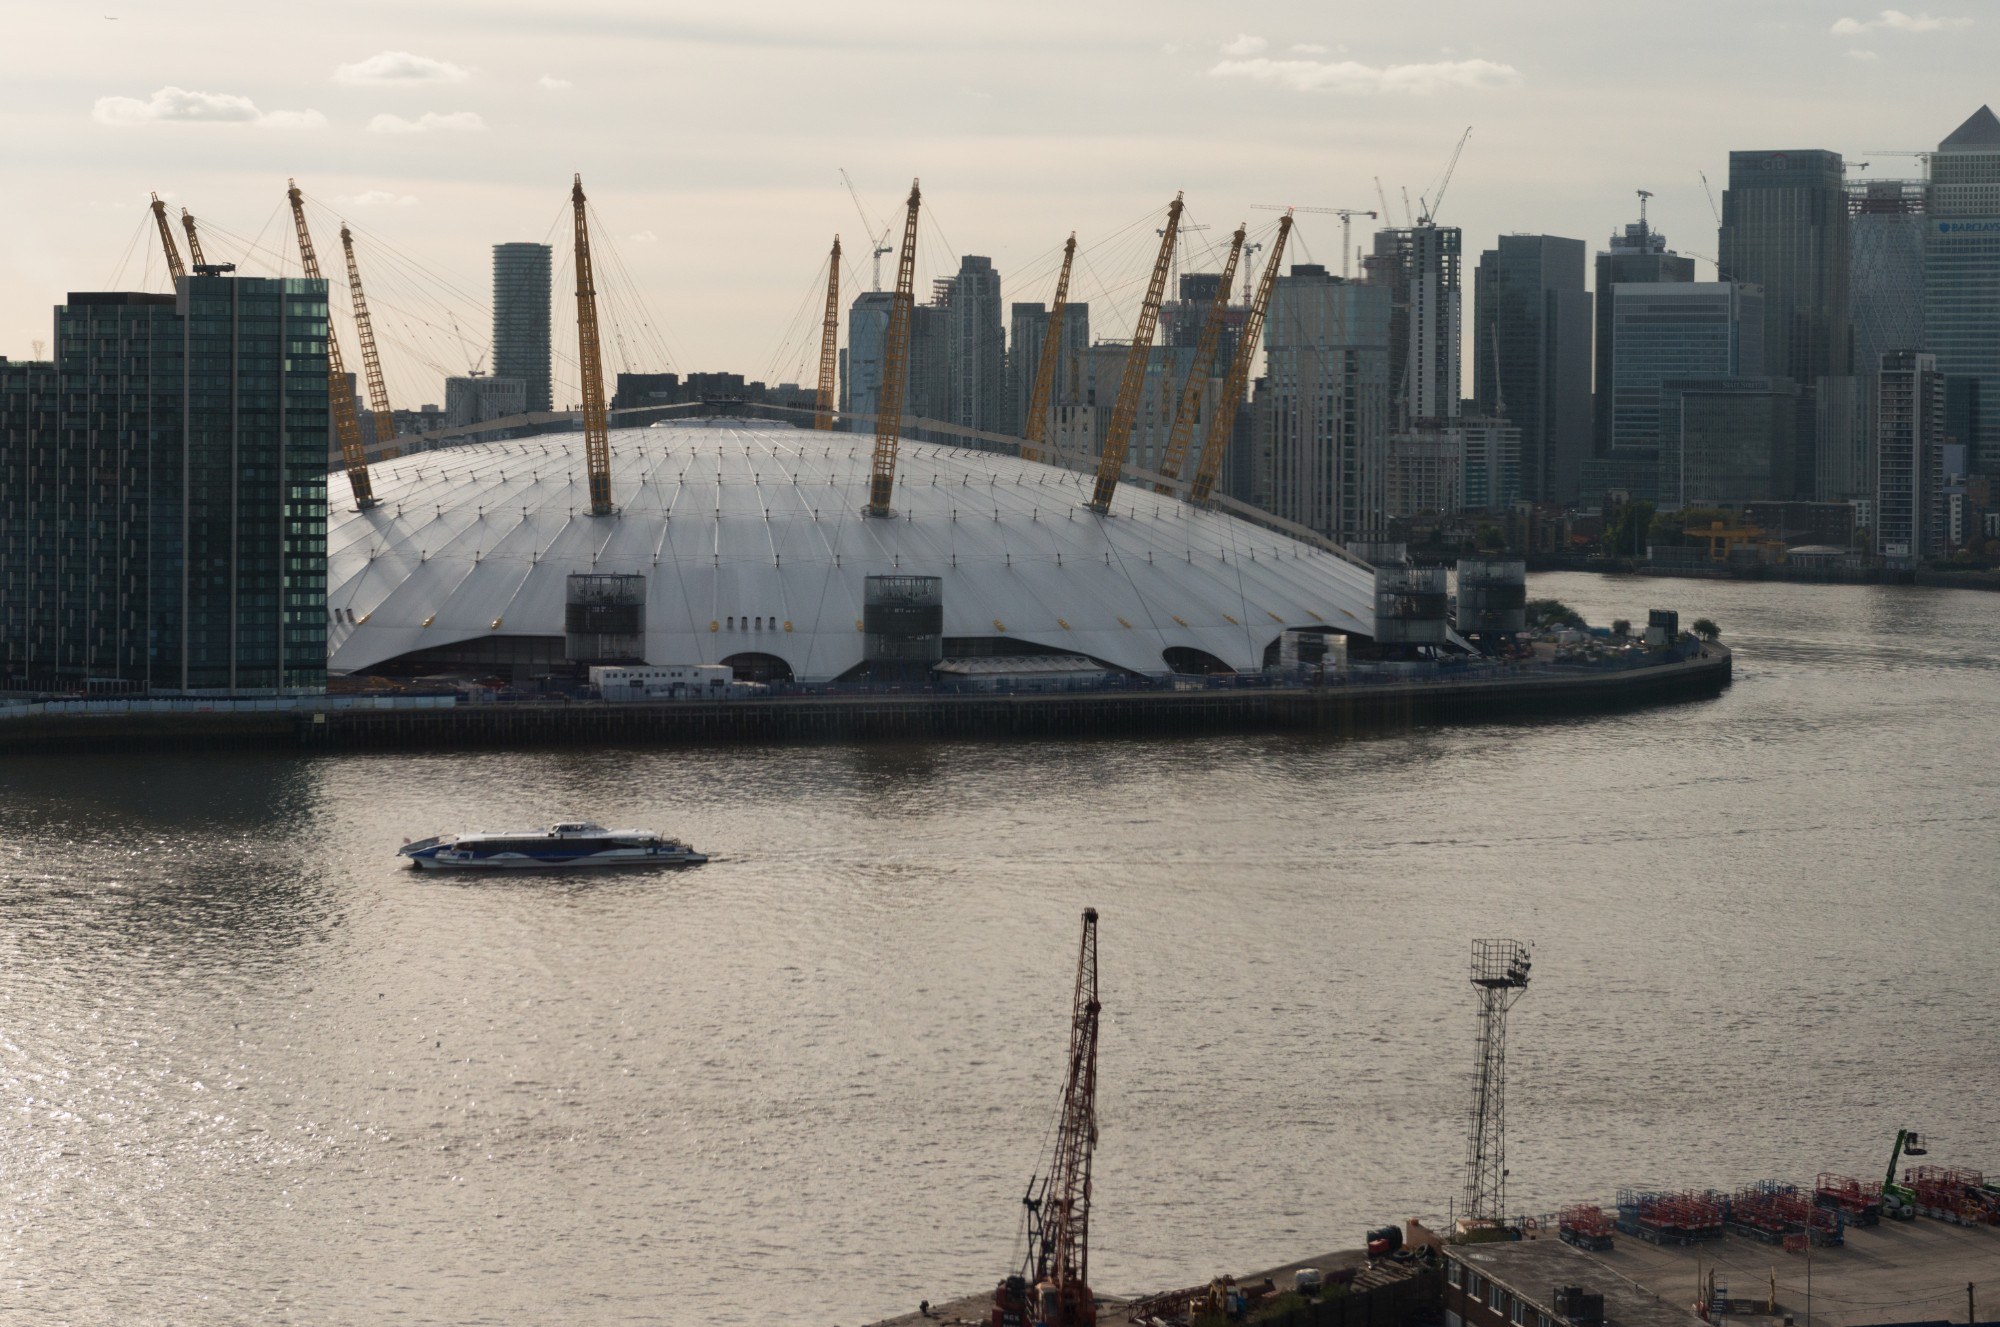 View of the O2 and the Thames from above